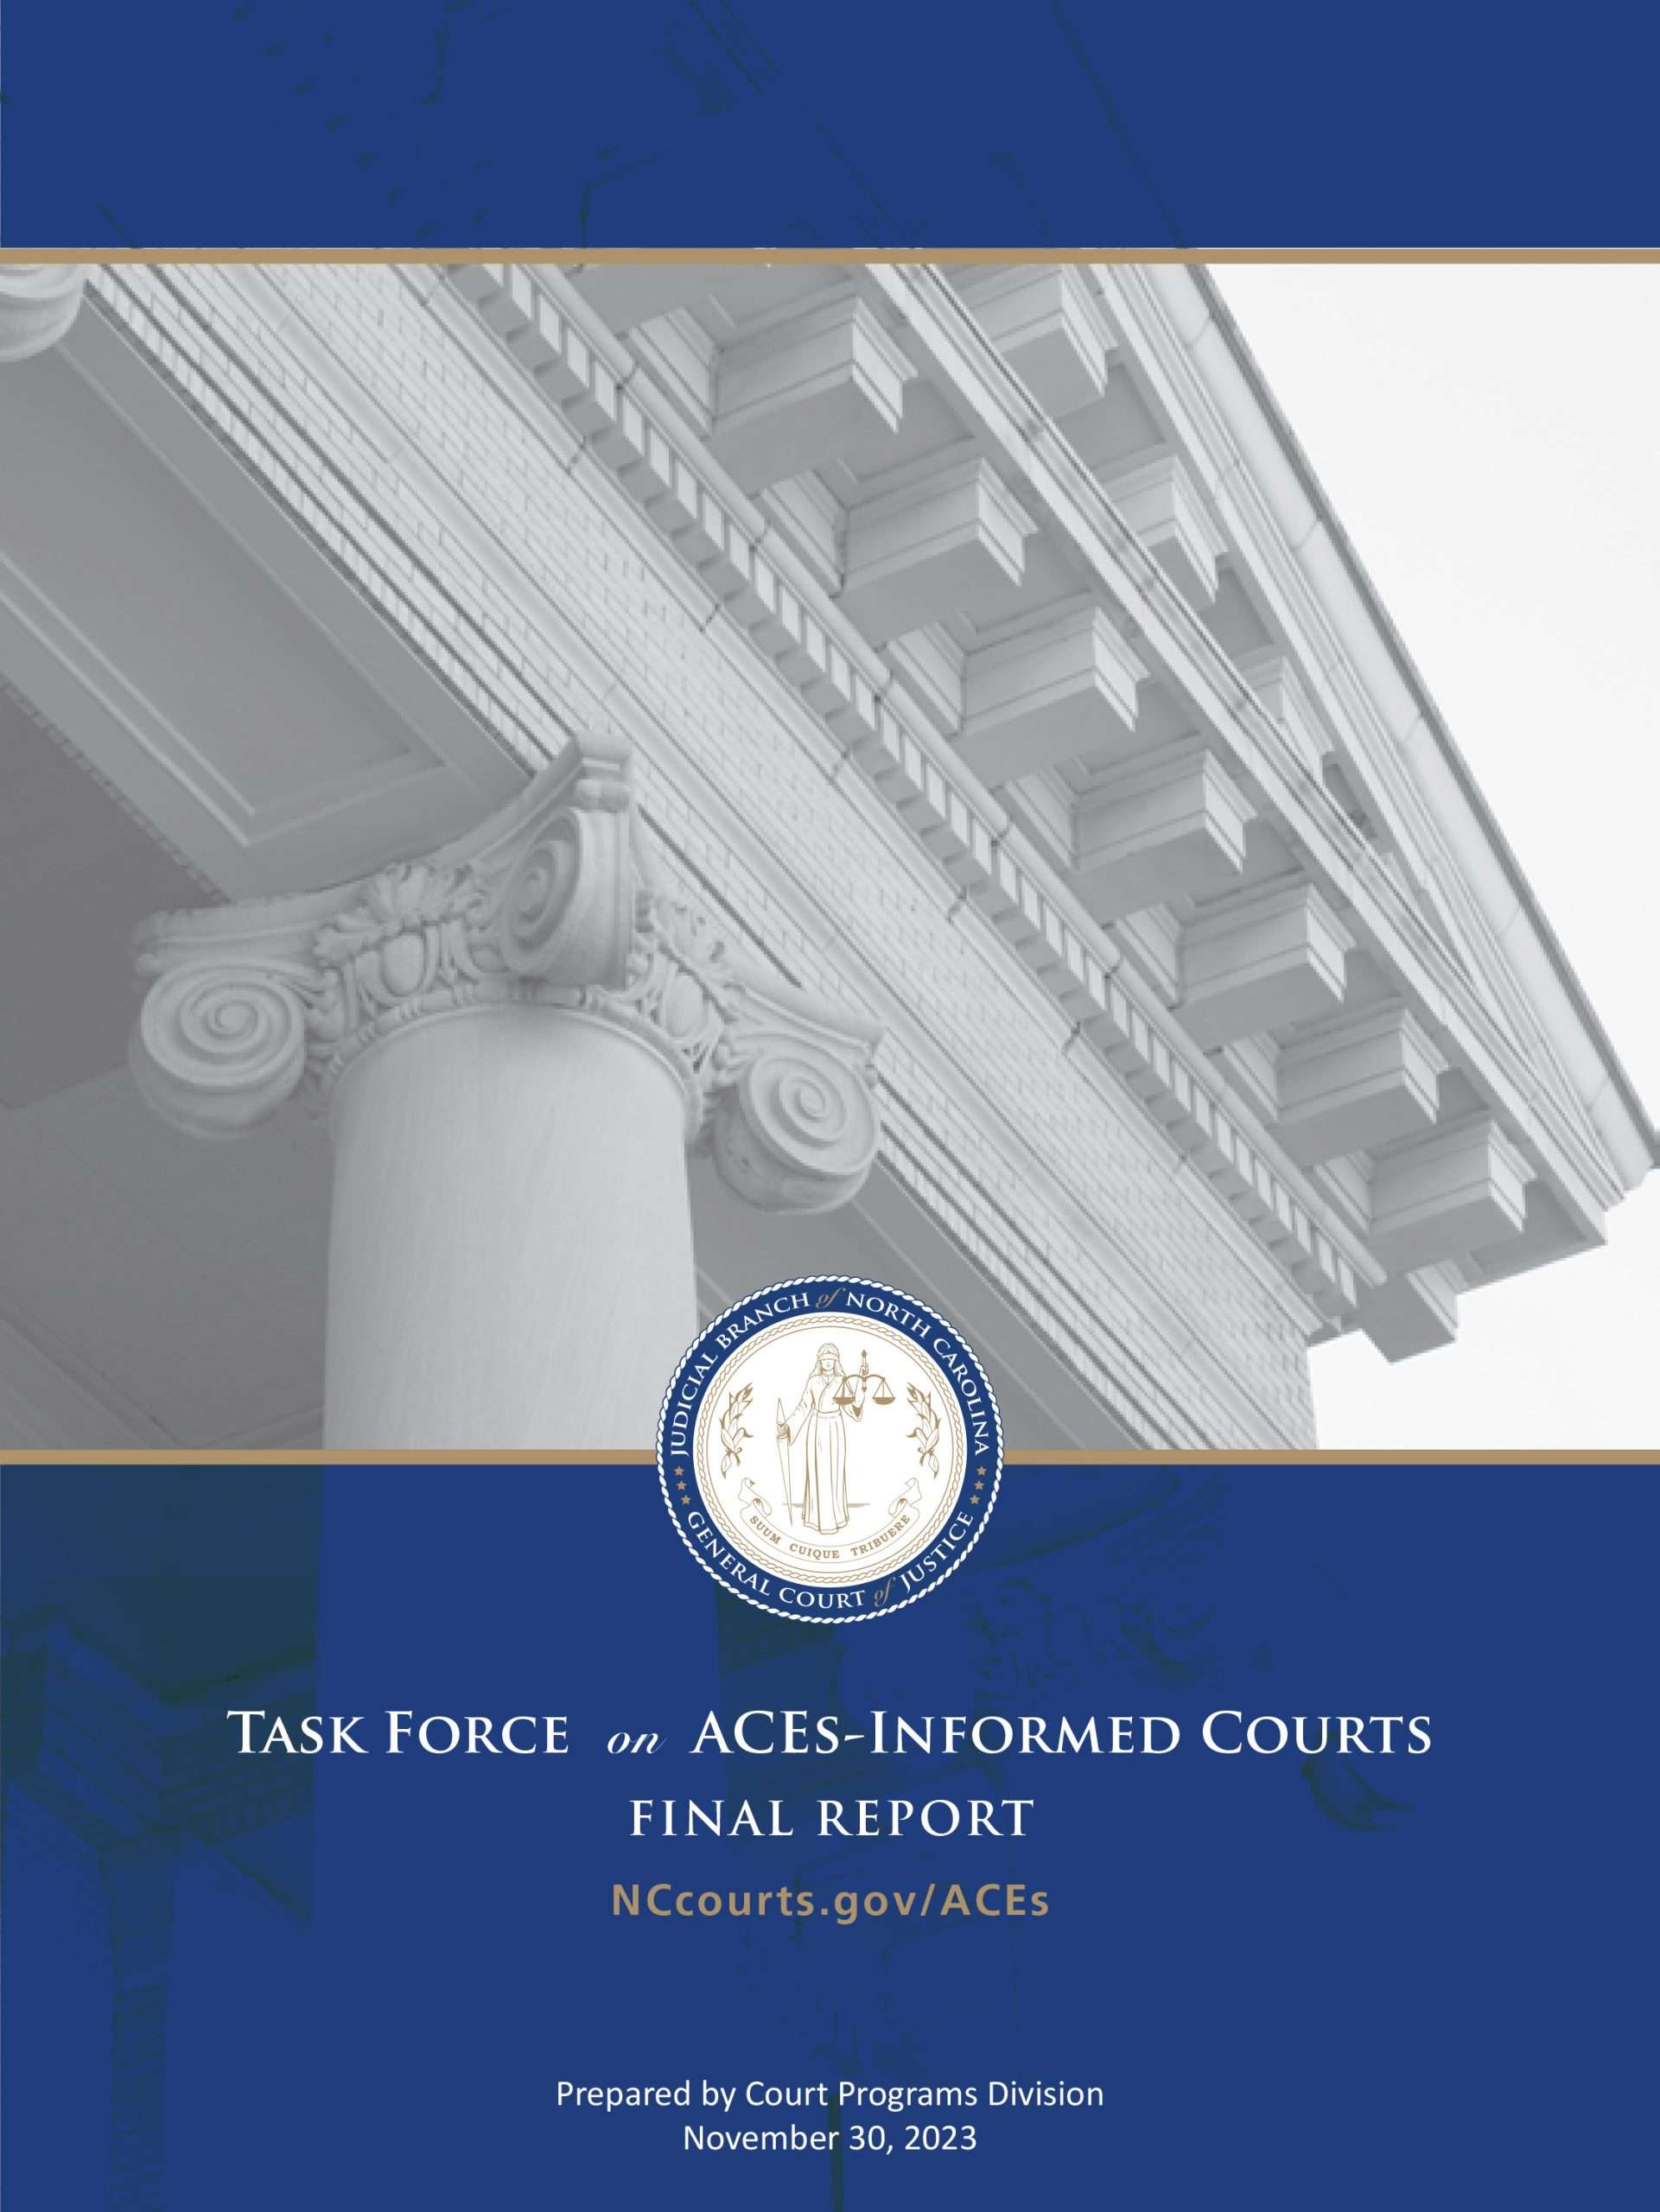 ACES-informed Courts Task Force Report